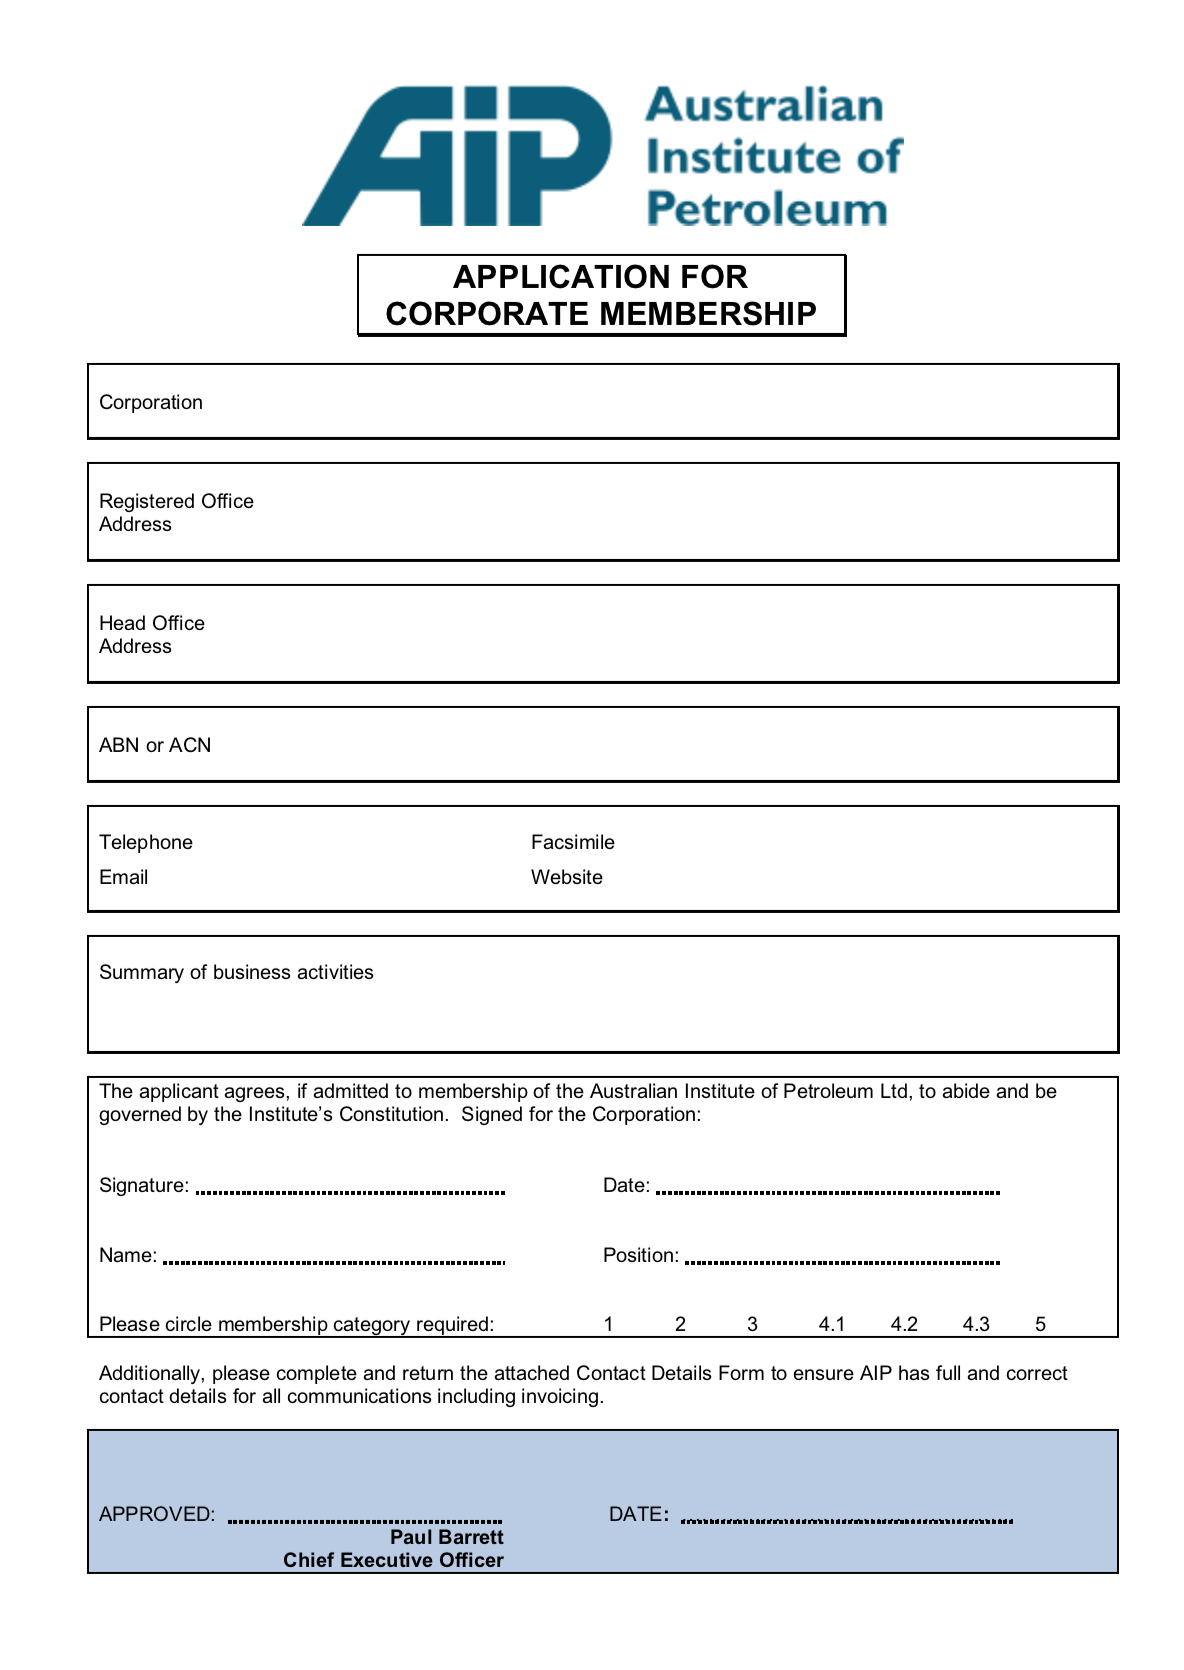 Application for Corporate Membership Form